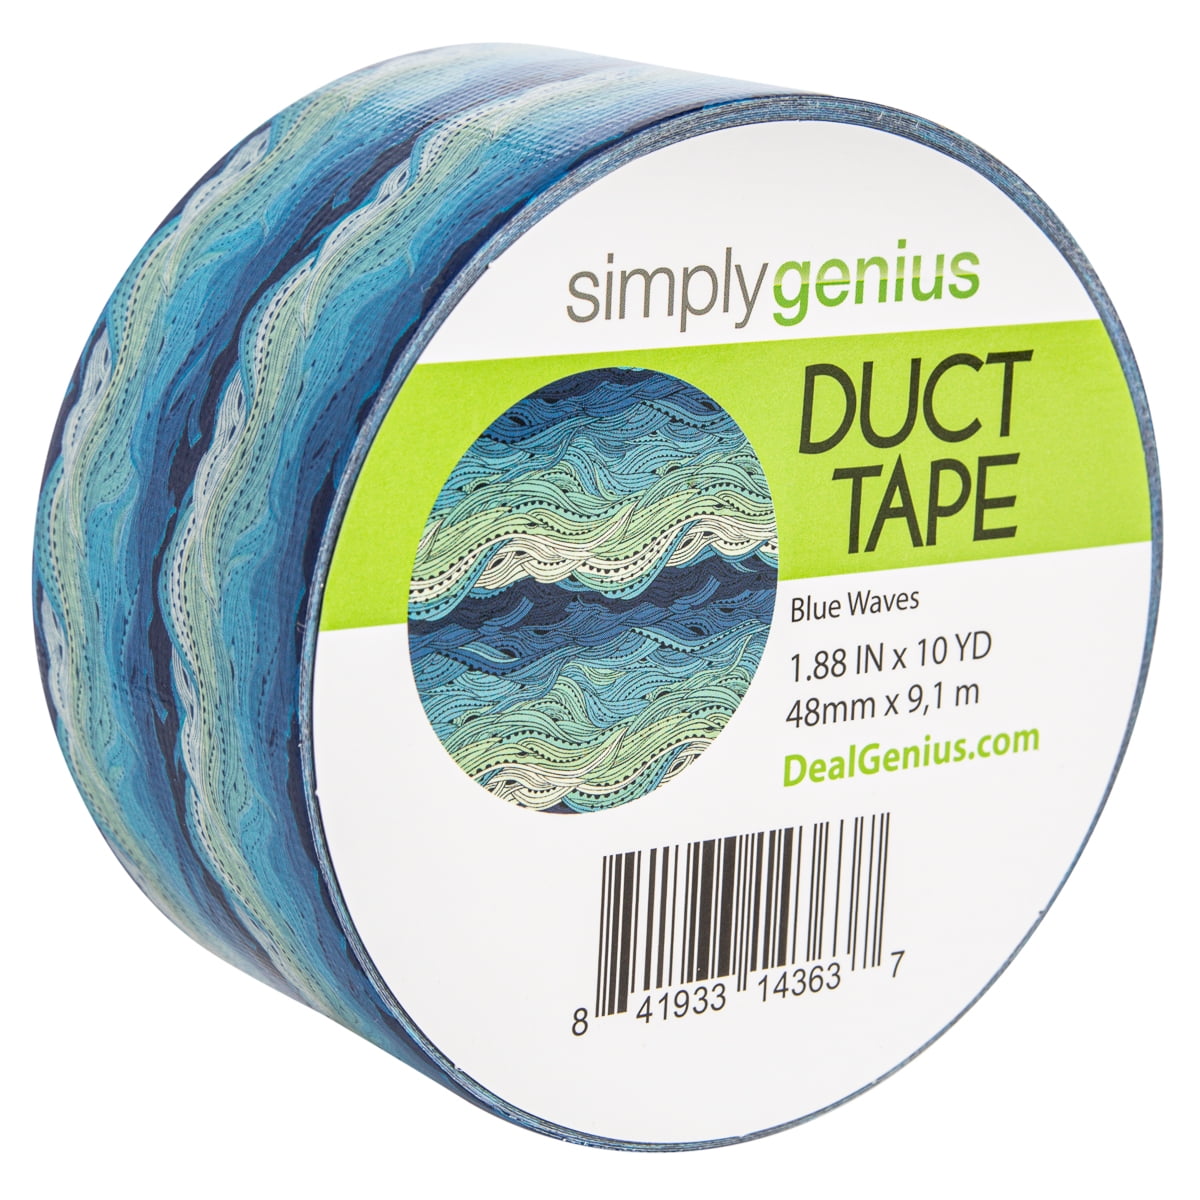 Simply Genius Craft Duct Tape Roll with Colors and Patterns, Pretty  Feathers 